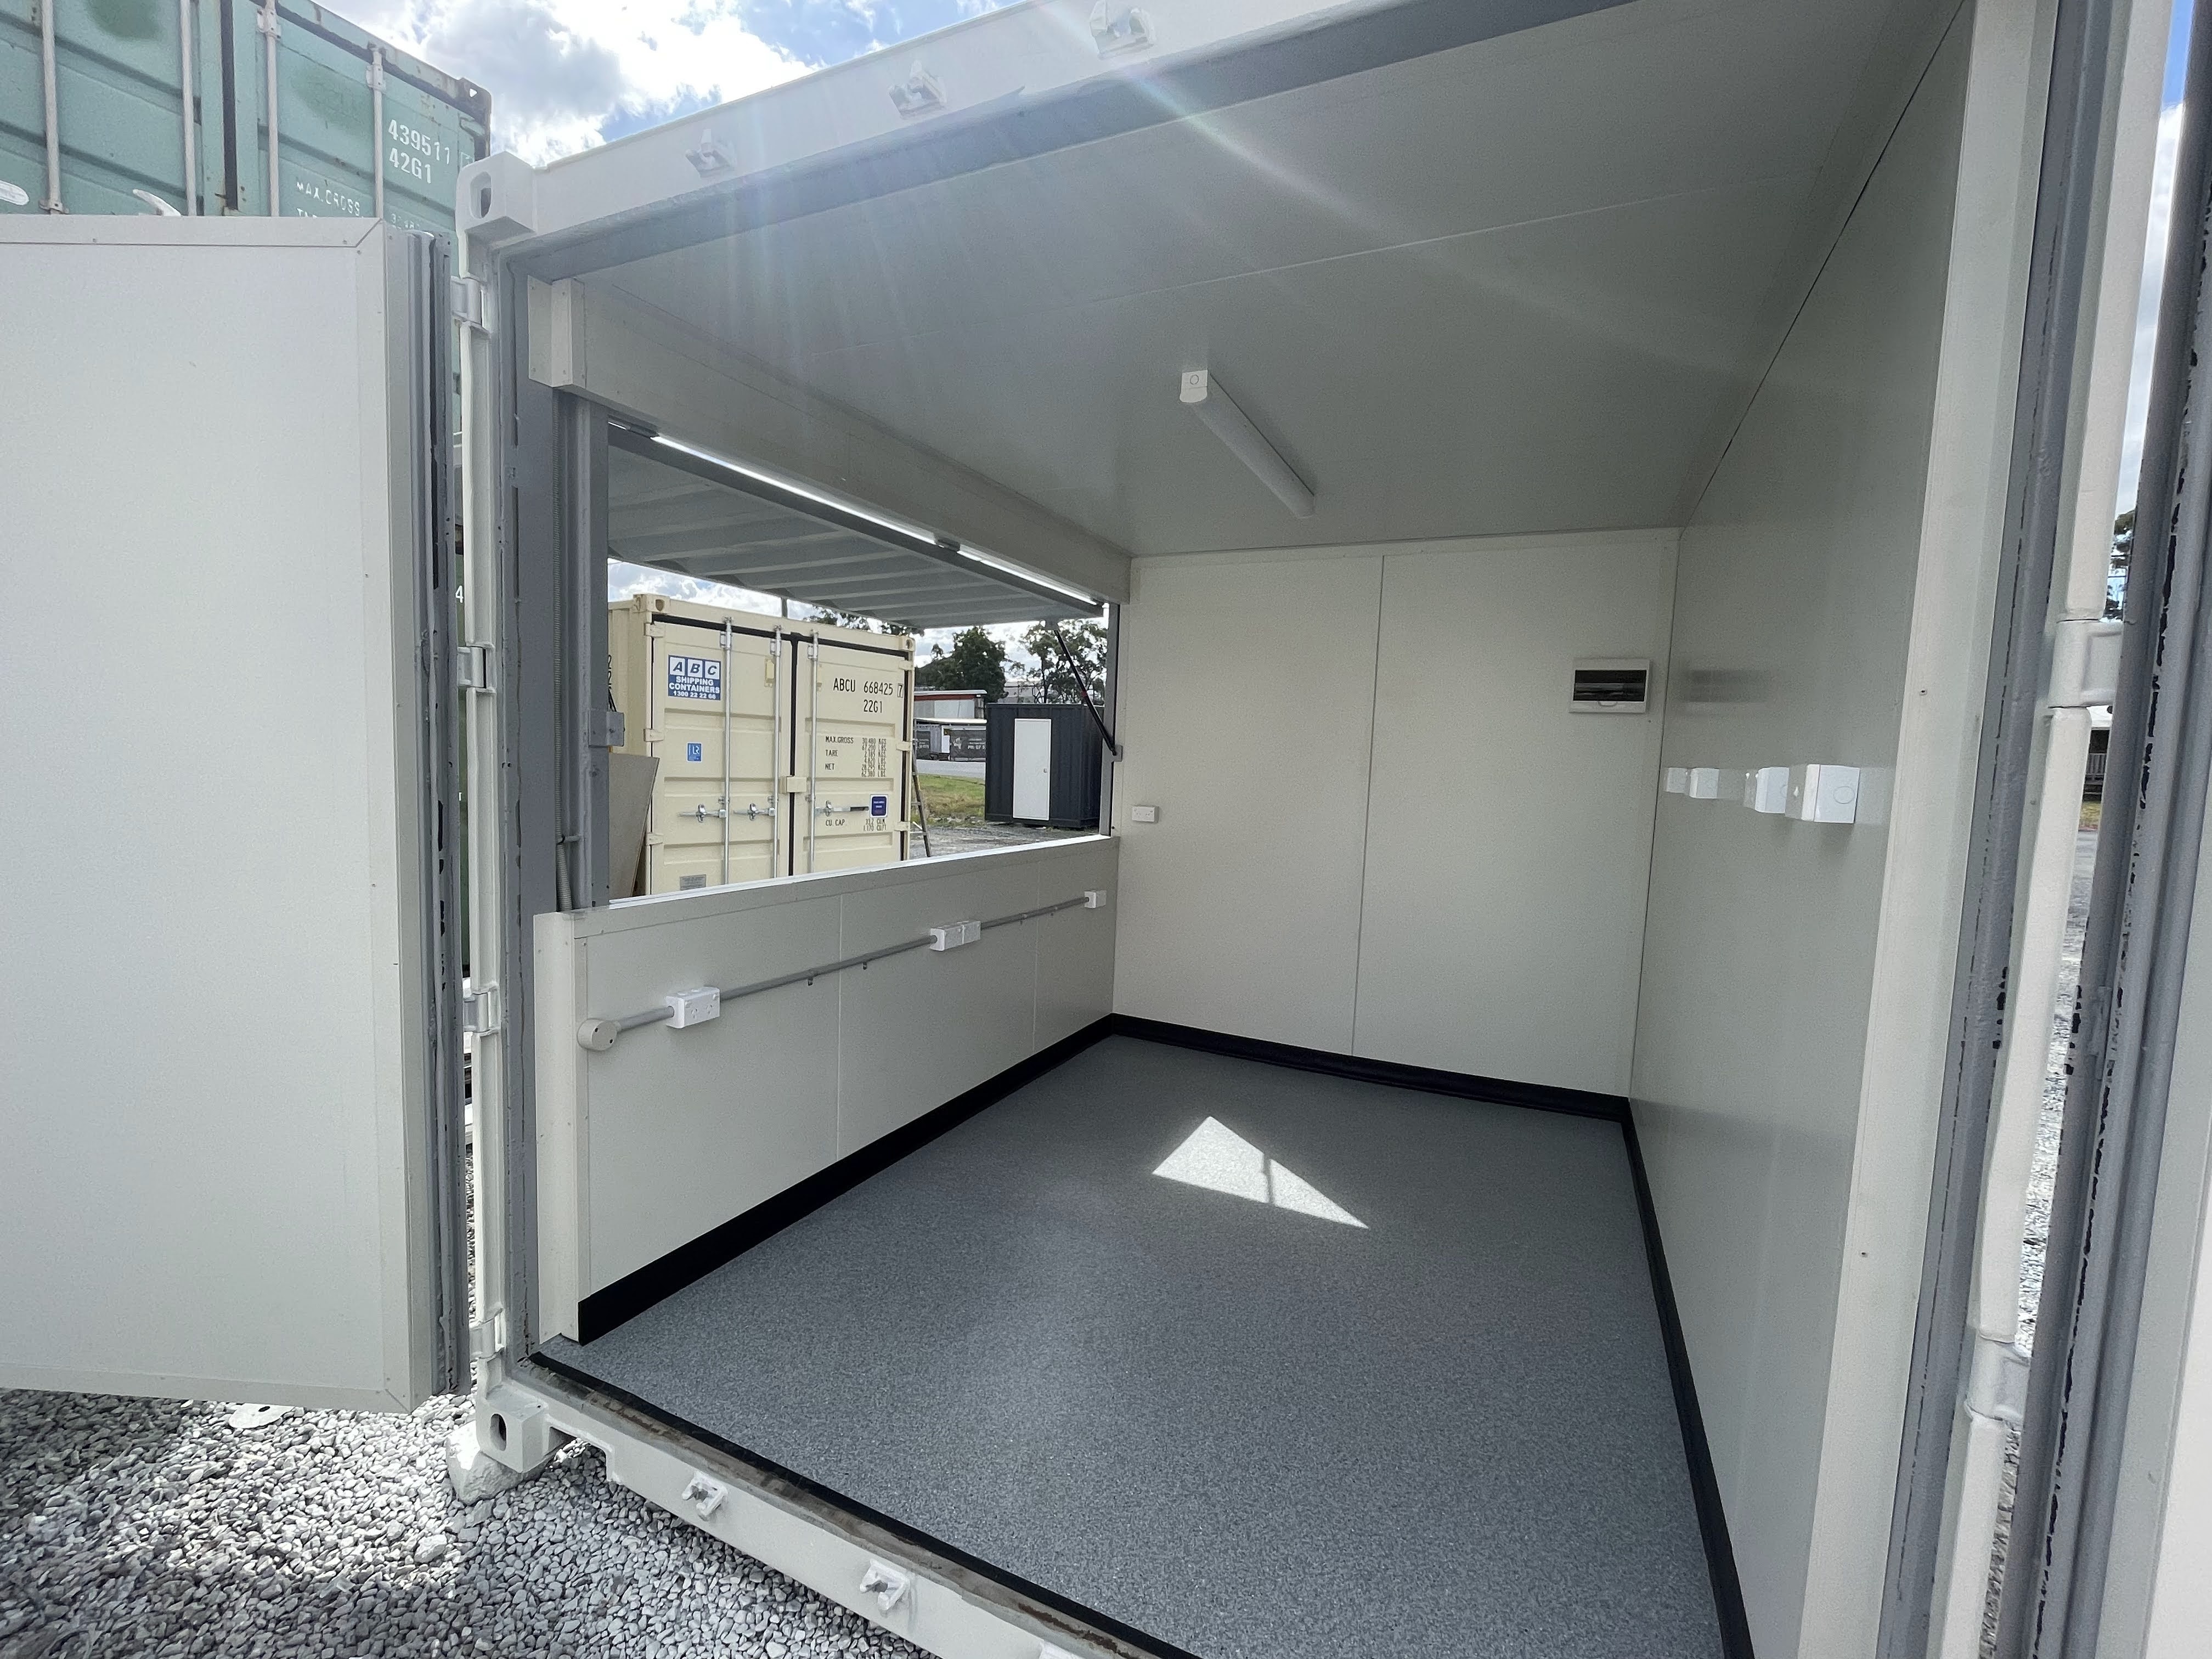 Modified shipping container with a servery window